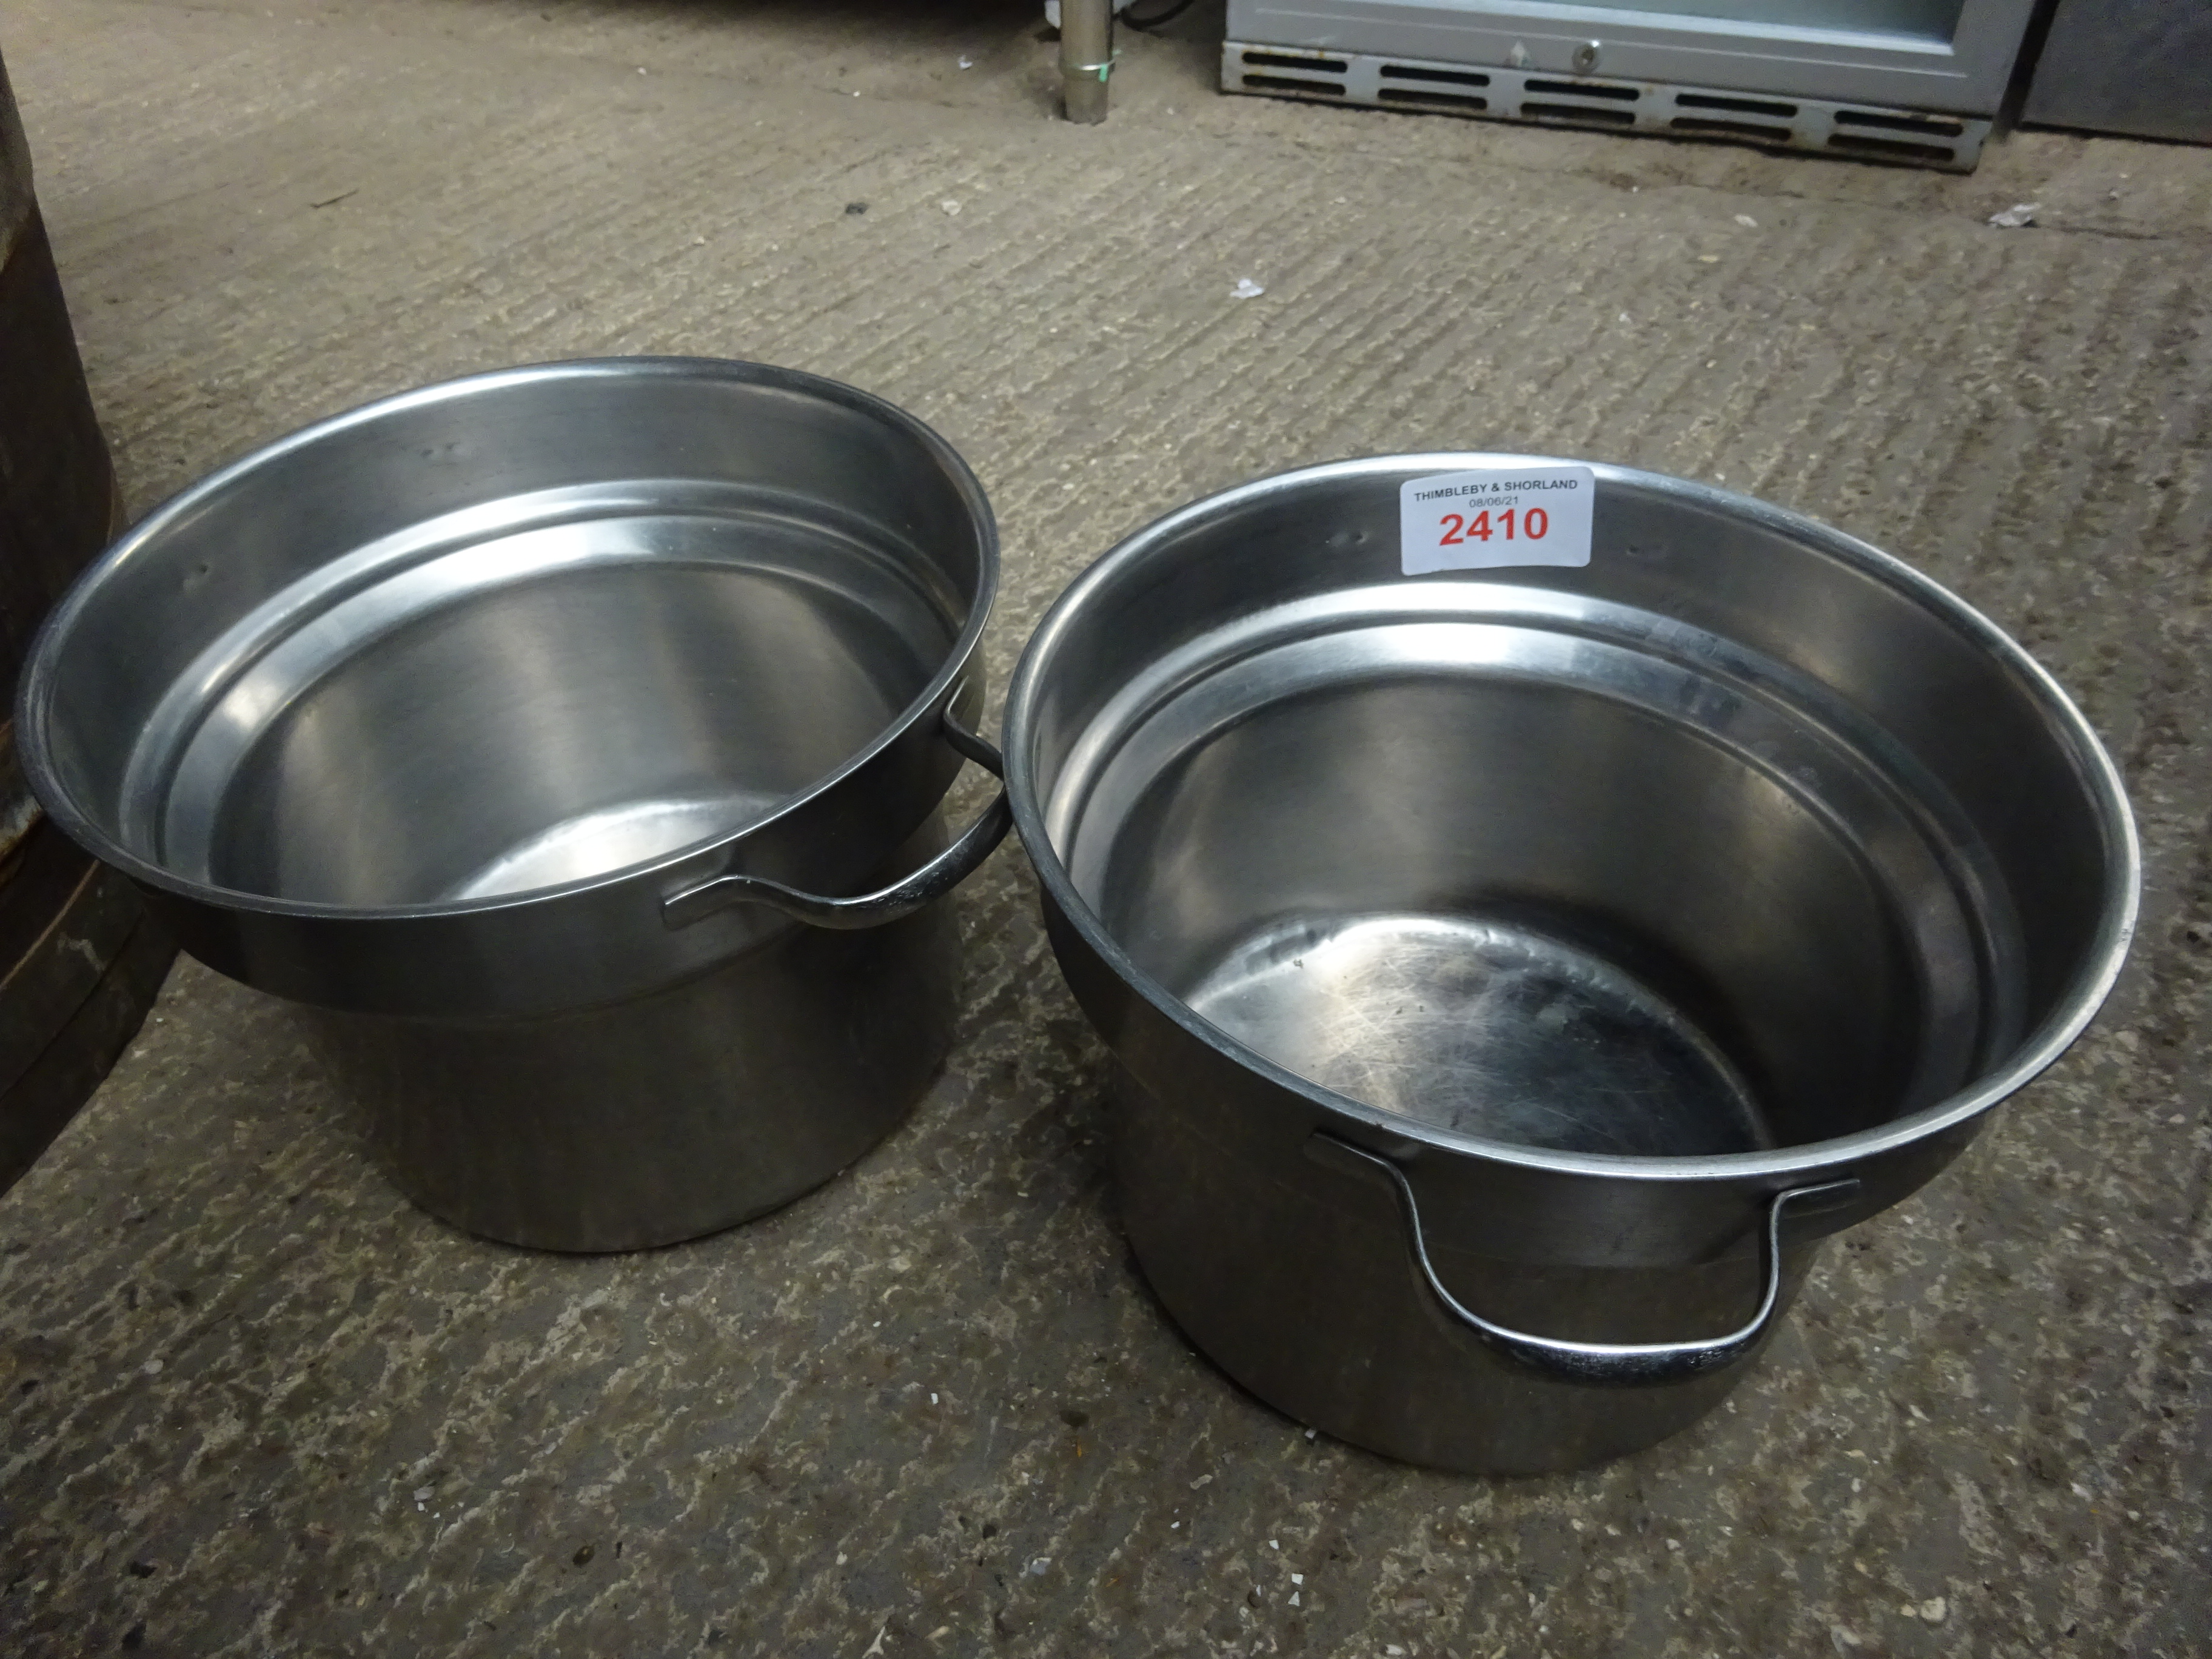 Two round containers with handles